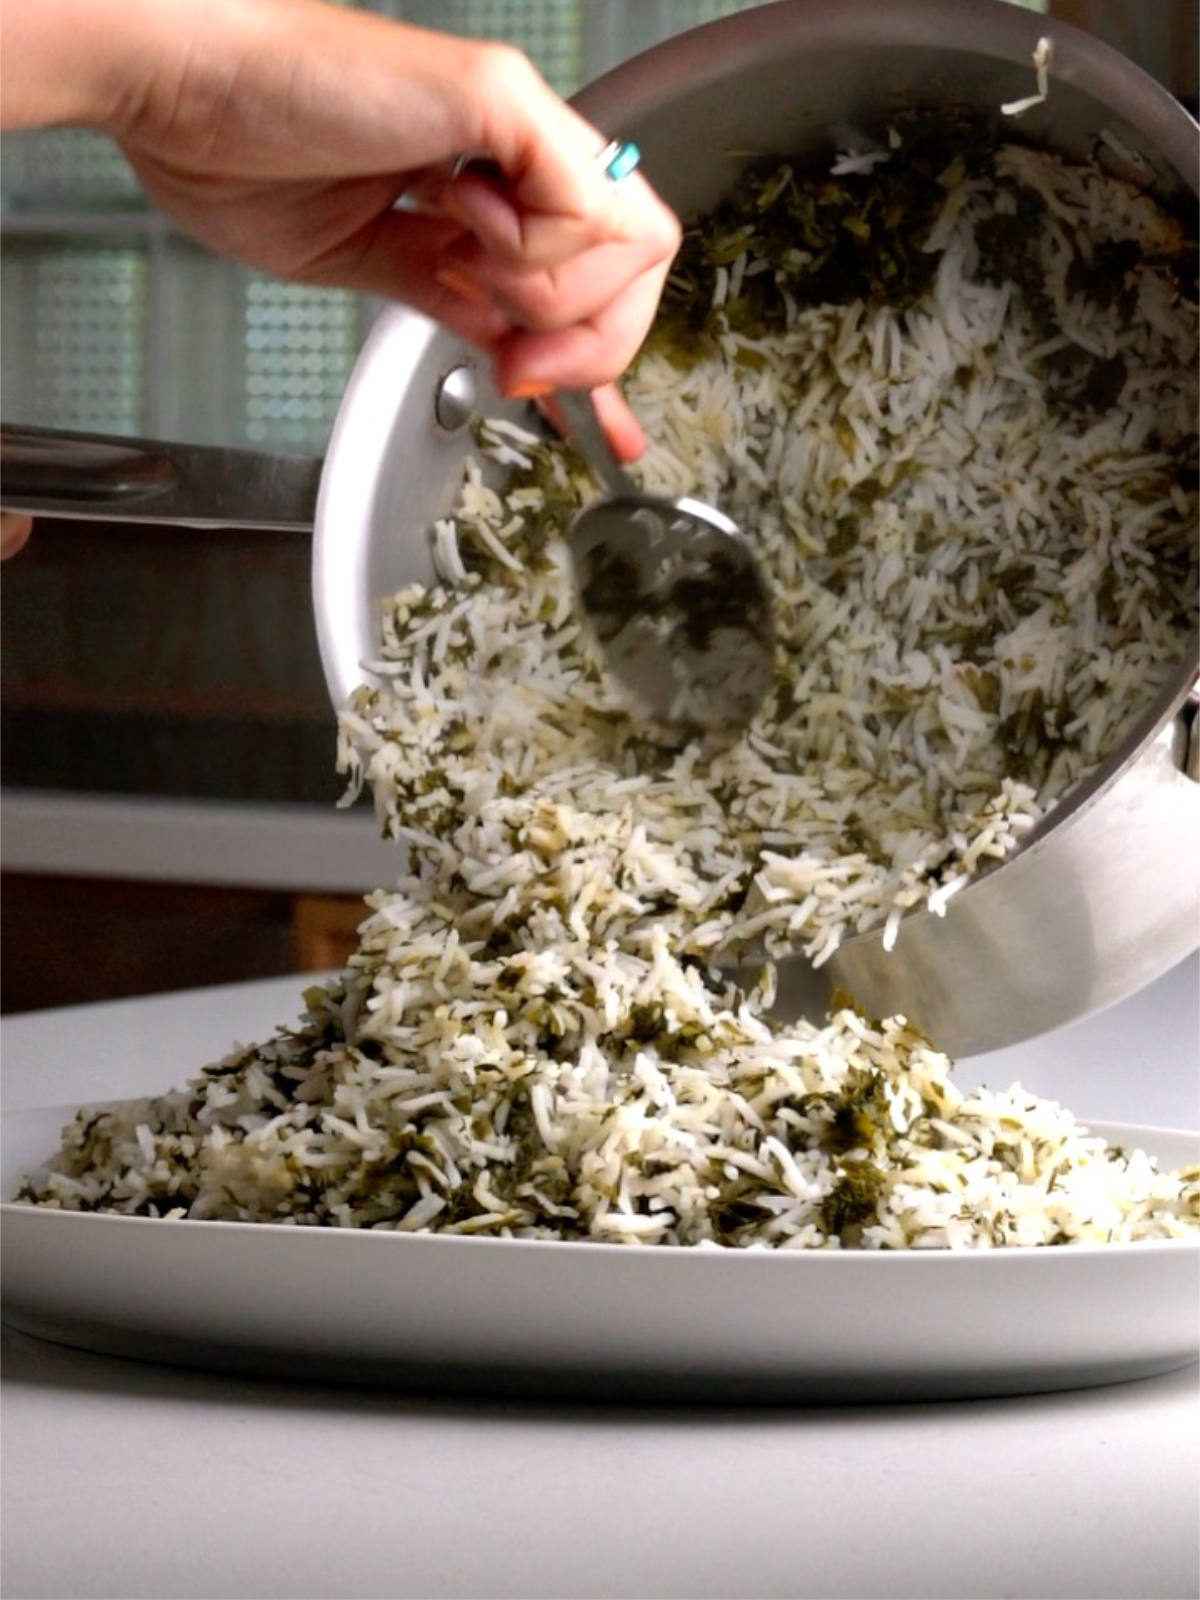 Pouring herbed rice from a metal pot into a white oval serving platter.